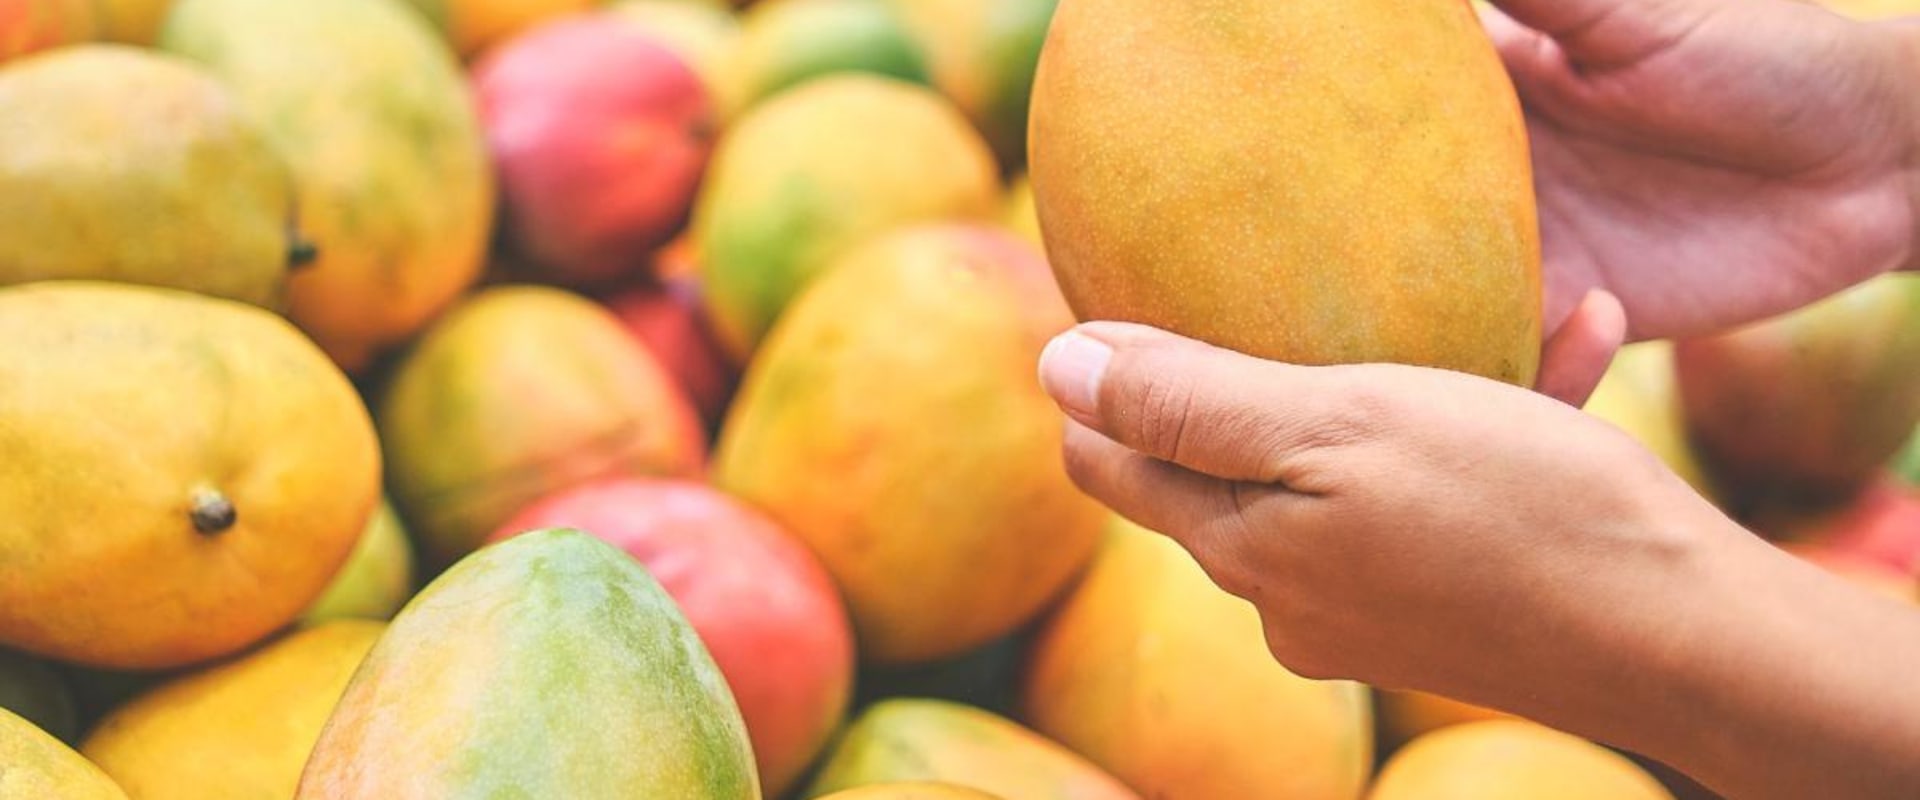 Can I Make Juice from a Whole Wholesale Raw Mango?